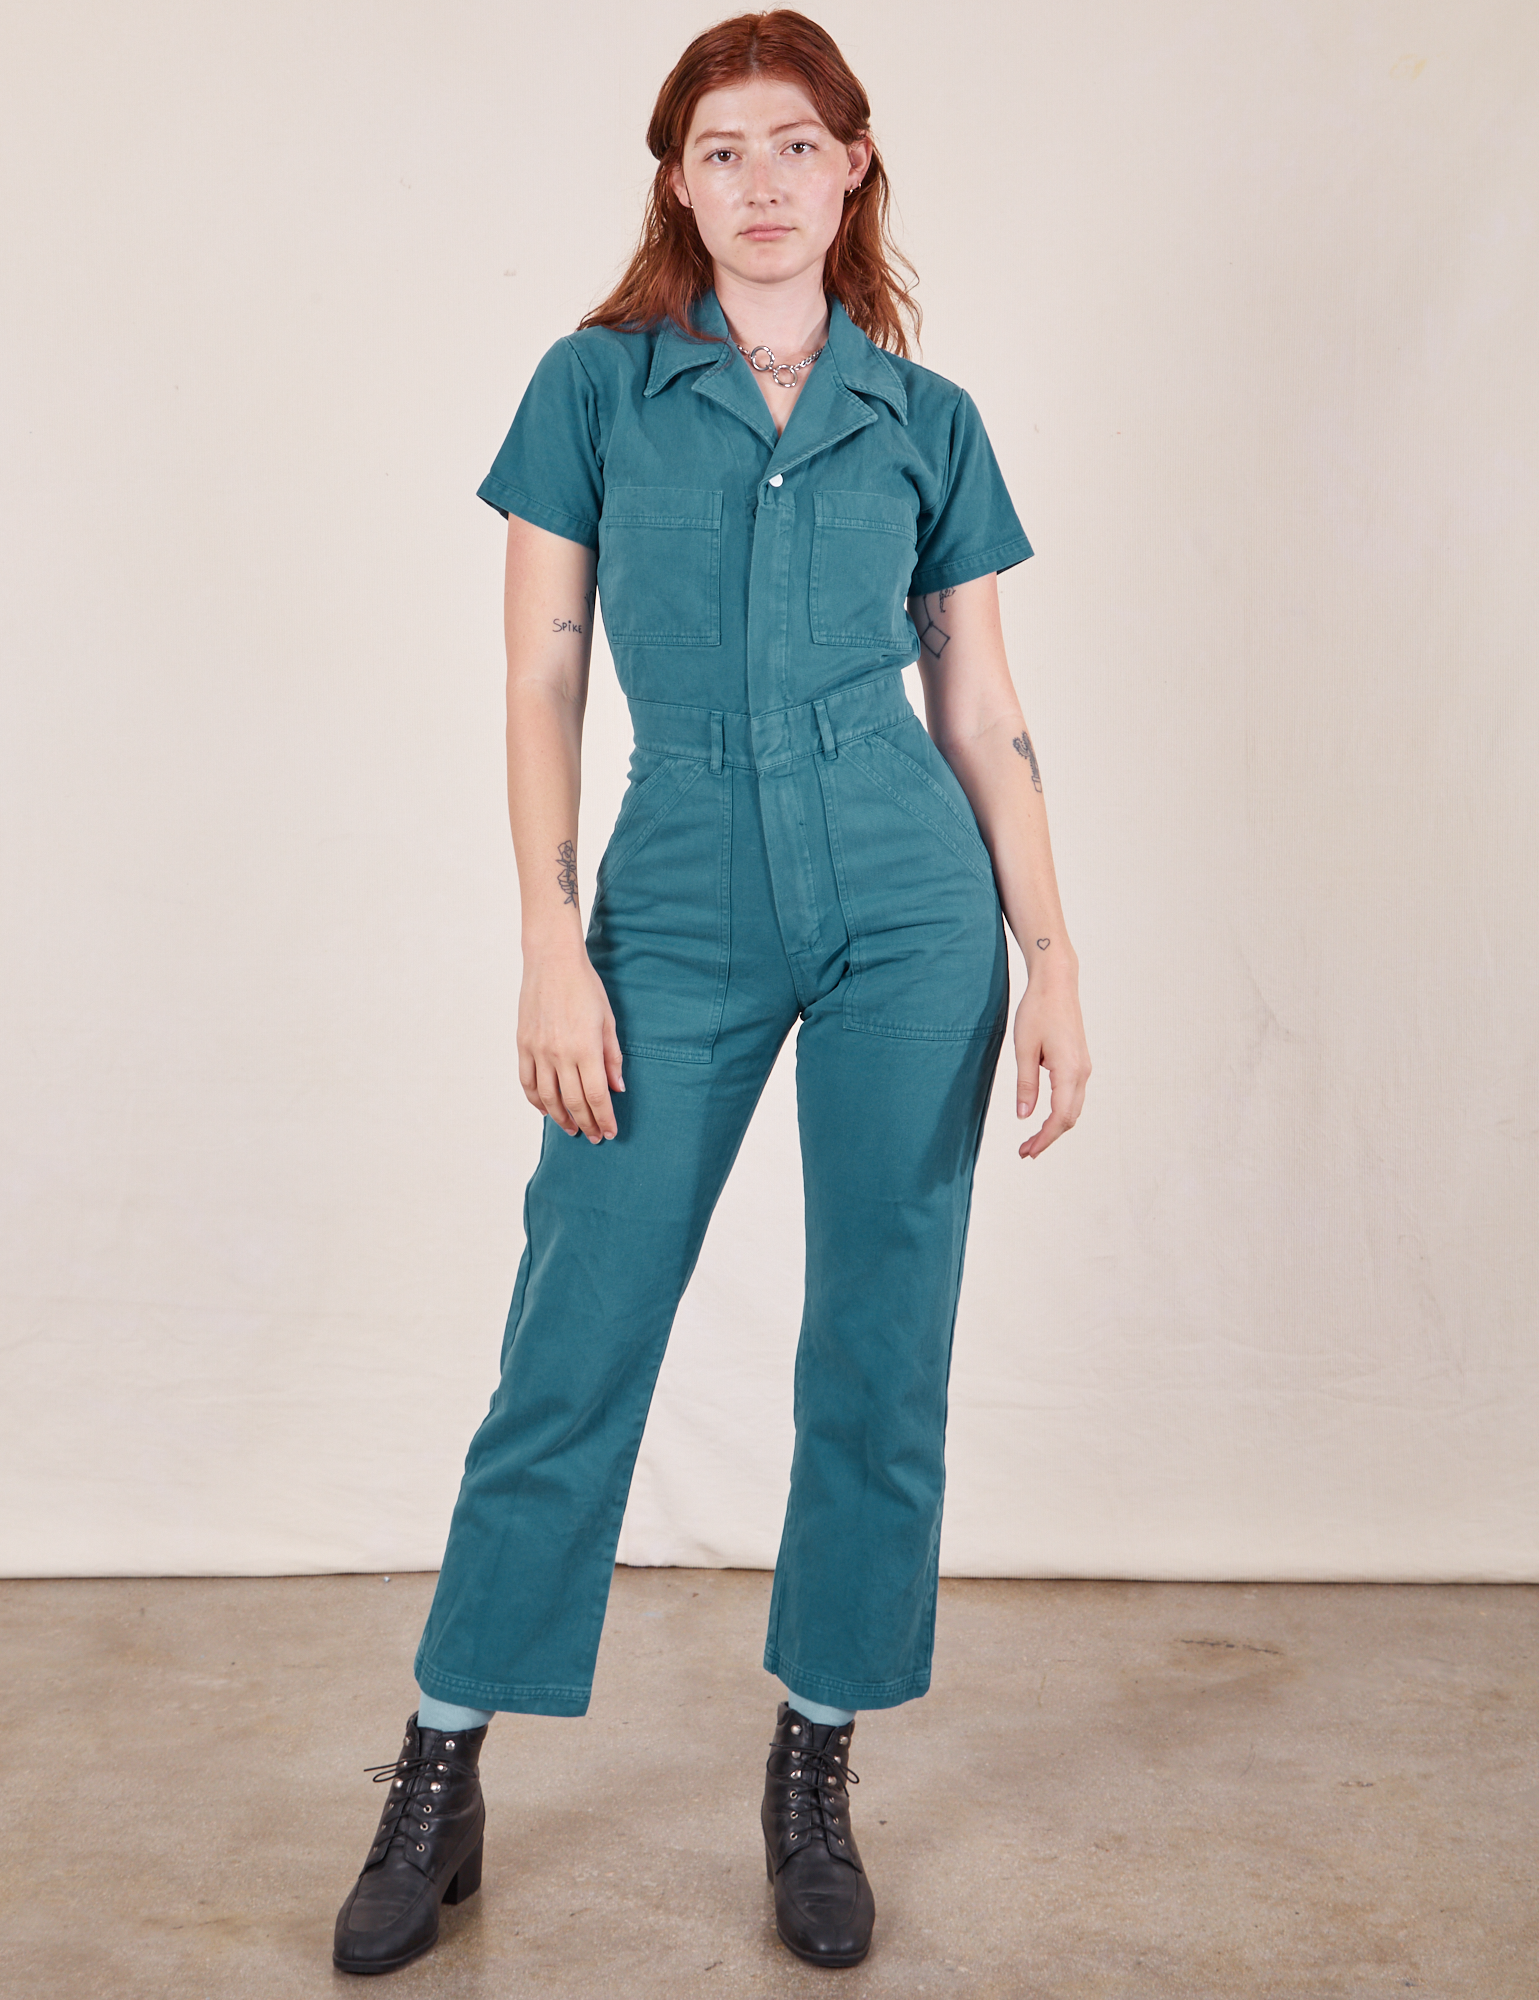 Alex is 5&#39;8&quot; and wearing XS Short Sleeve Jumpsuit in Marine Blue